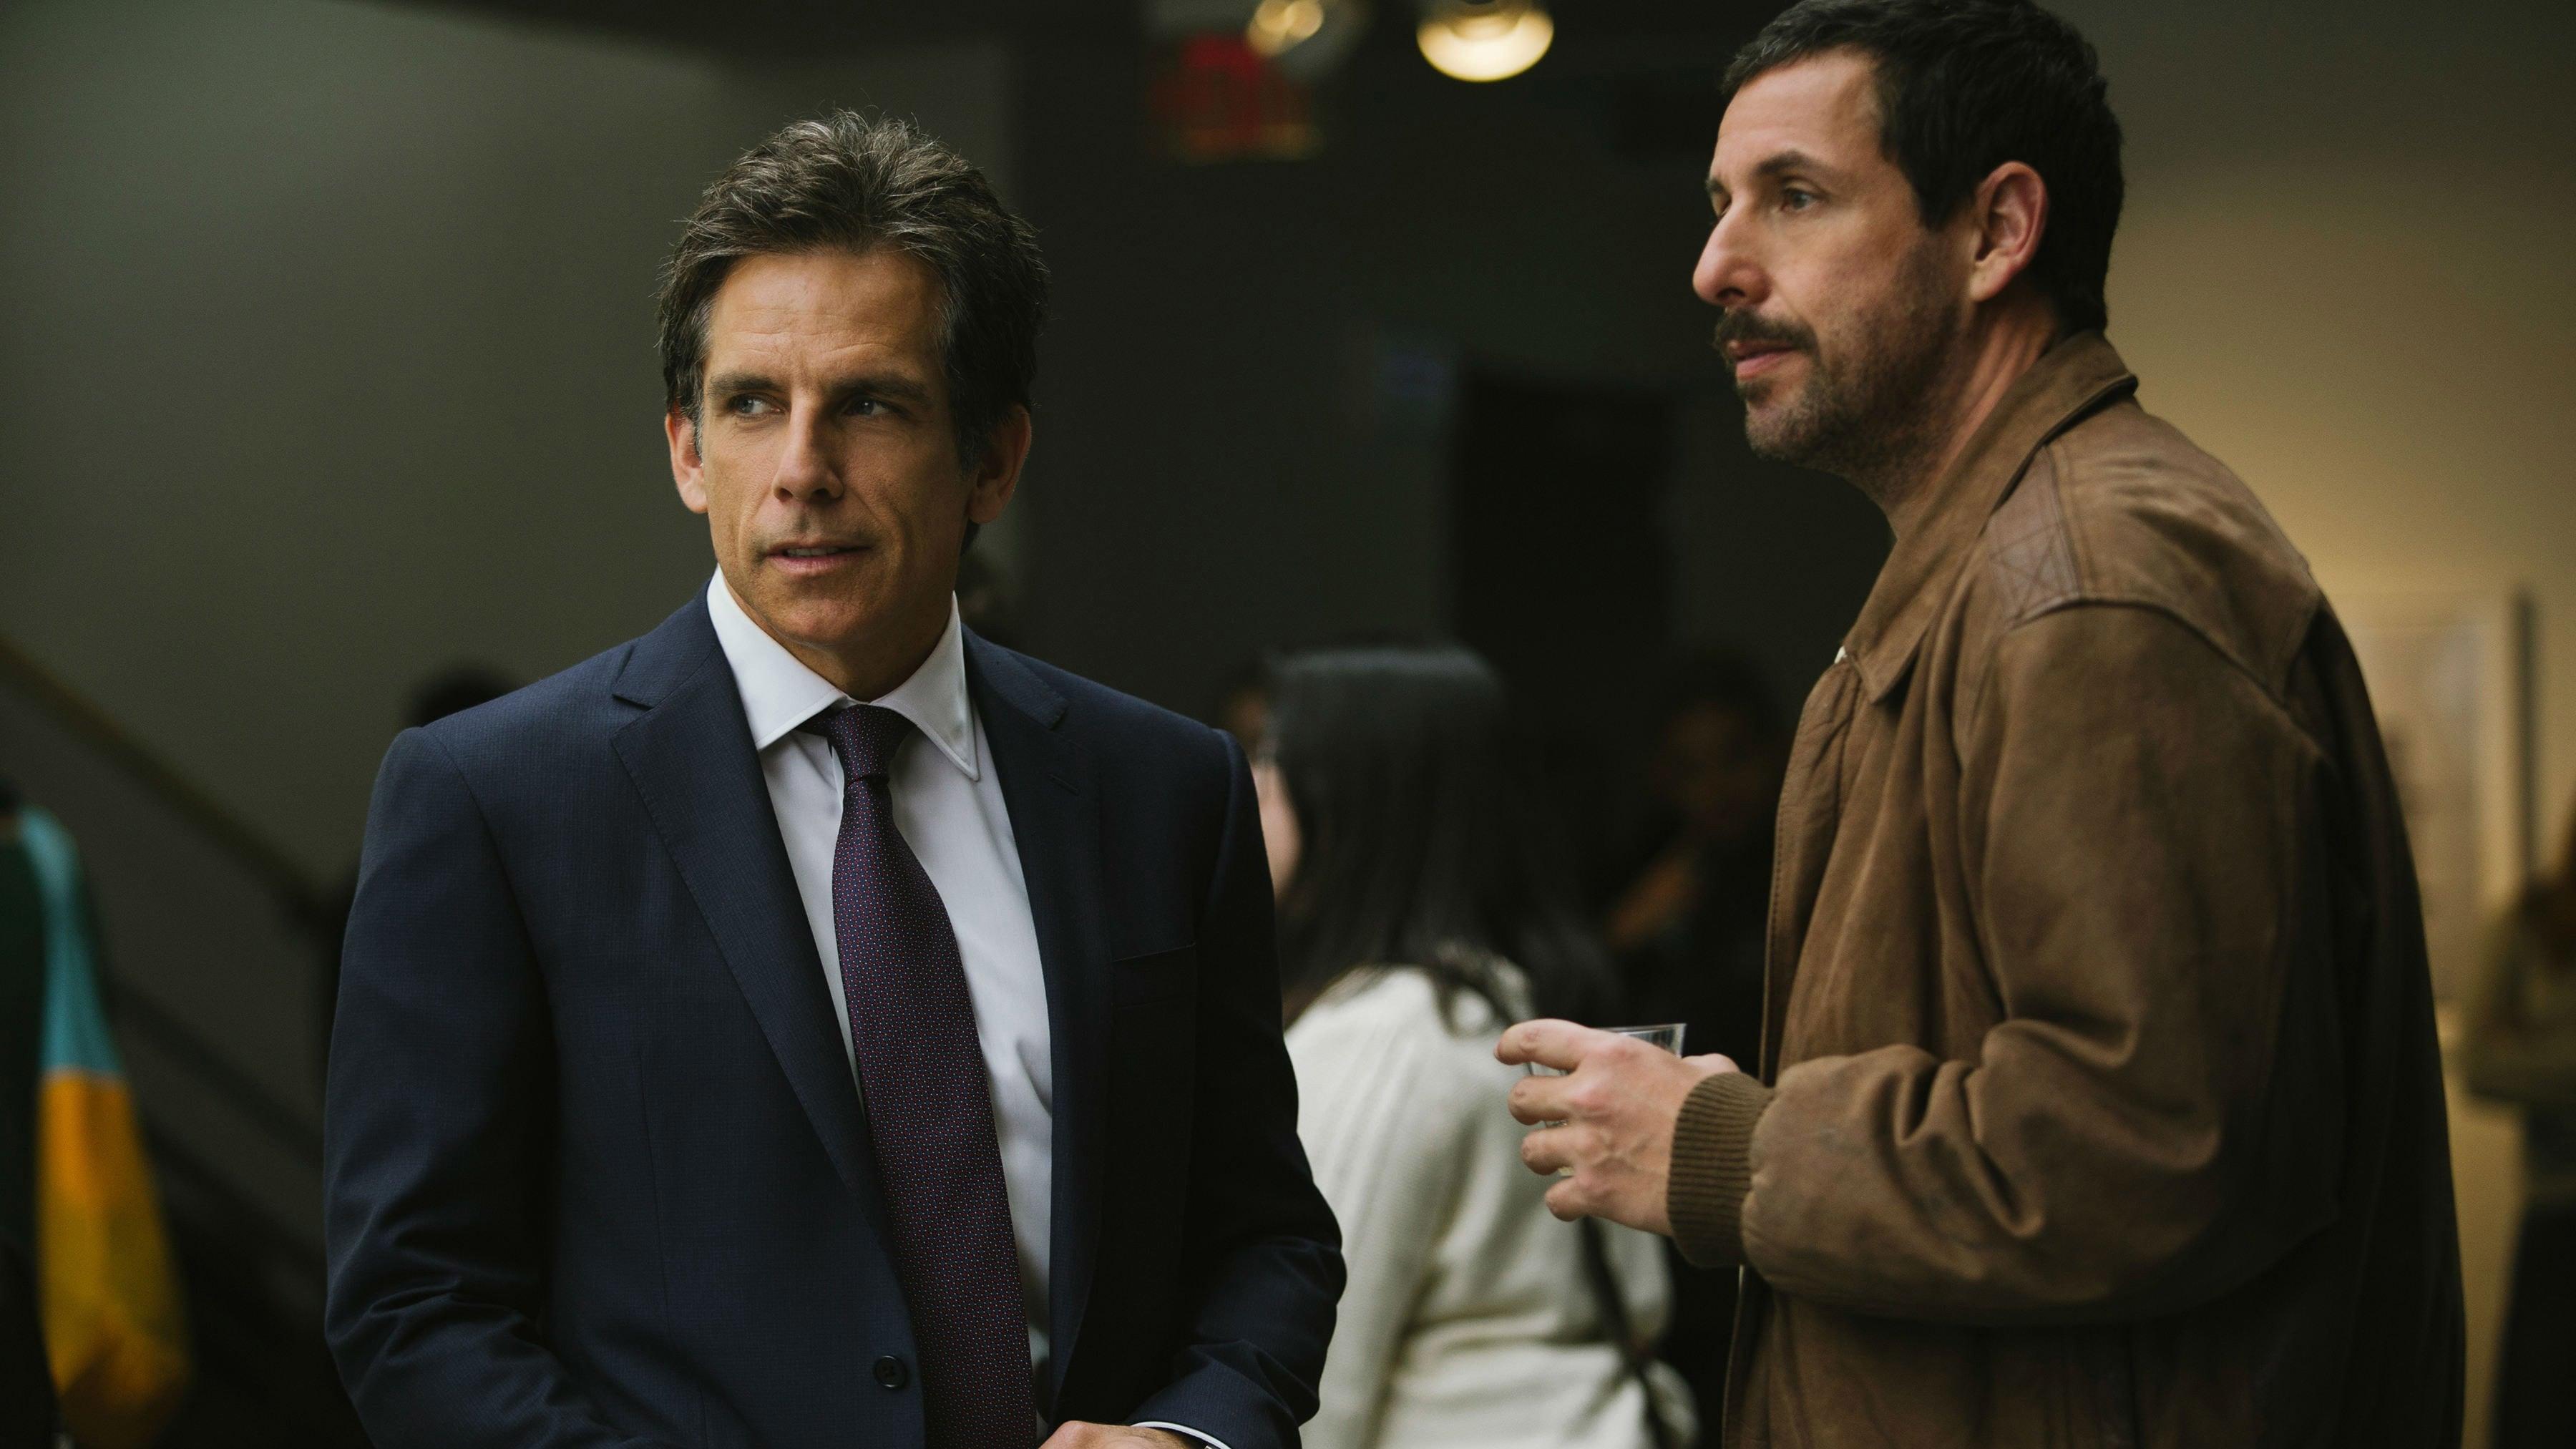 The Meyerowitz Stories (New and Selected) backdrop